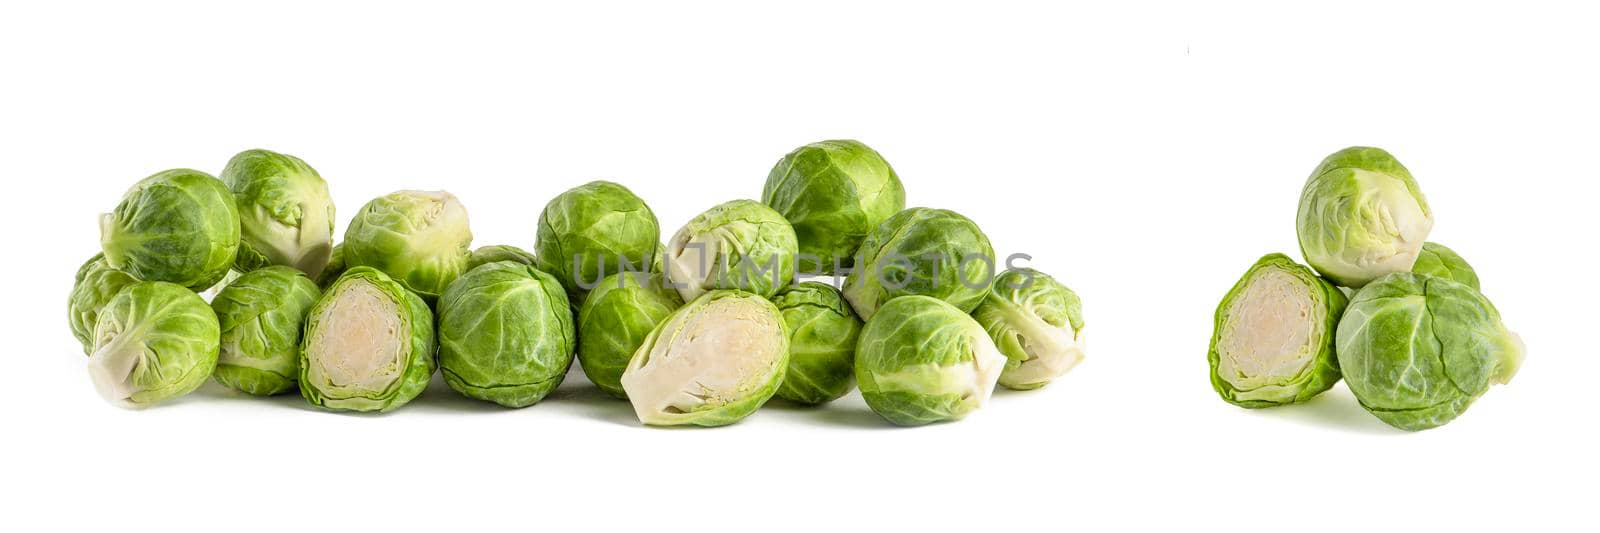 Brussels sprouts. Set of fresh brussels sprouts in stacks on white isolated background. Deep focus stacking